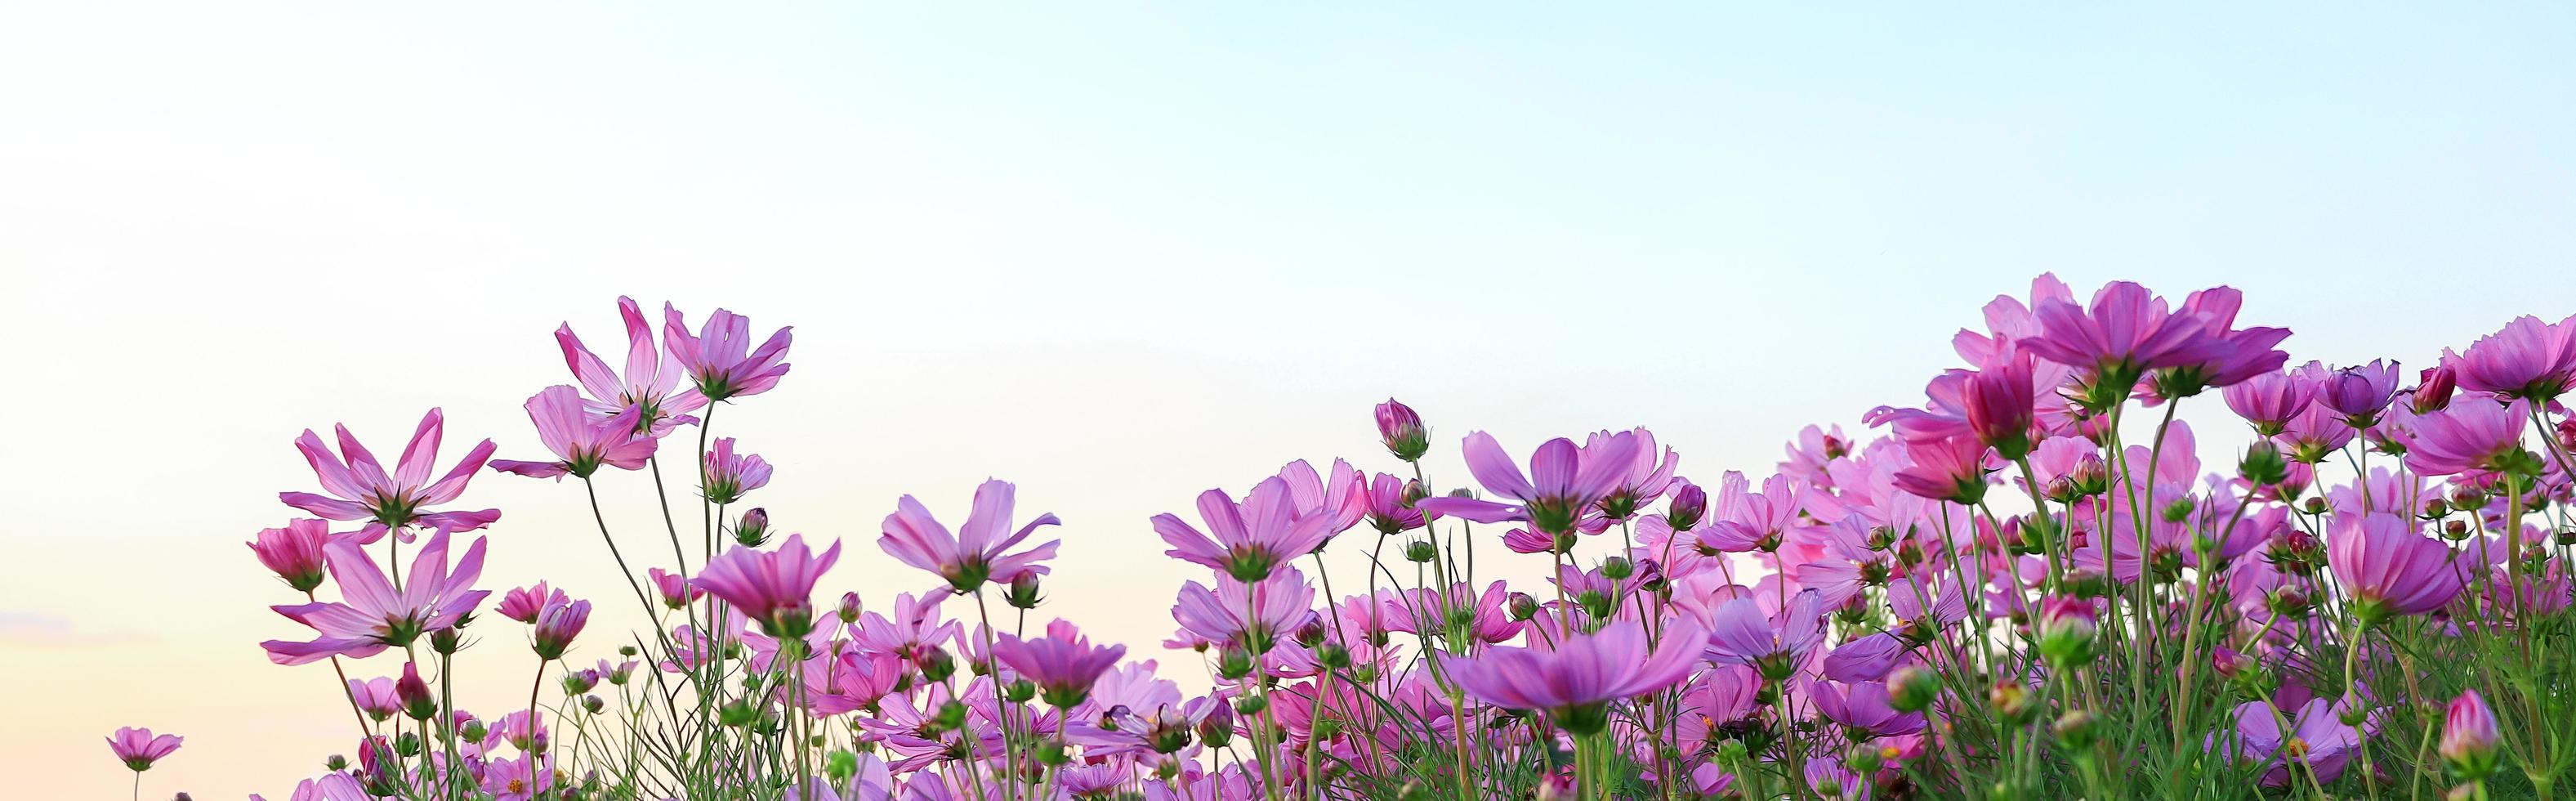 Cosmos flowers are blooming beautifully in the natural garden photo